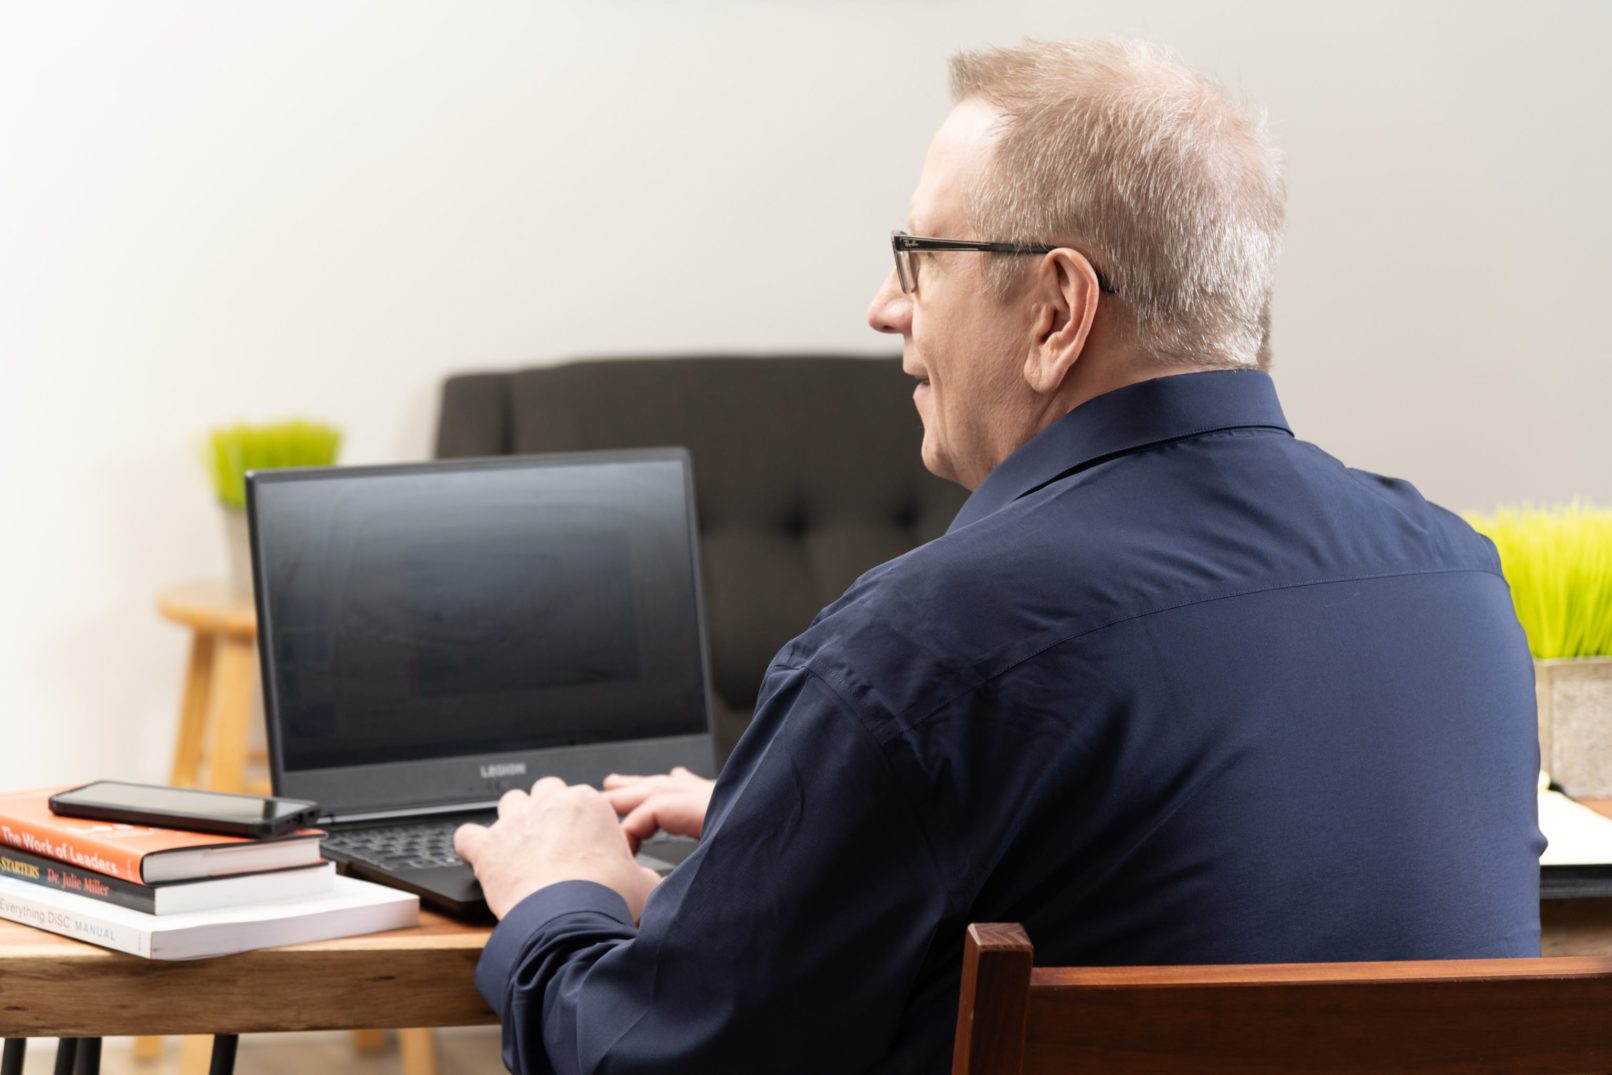 Portrait-Personal Branding photo of a man in a black fresh shirt sitting down and working on a black laptop at a desk.